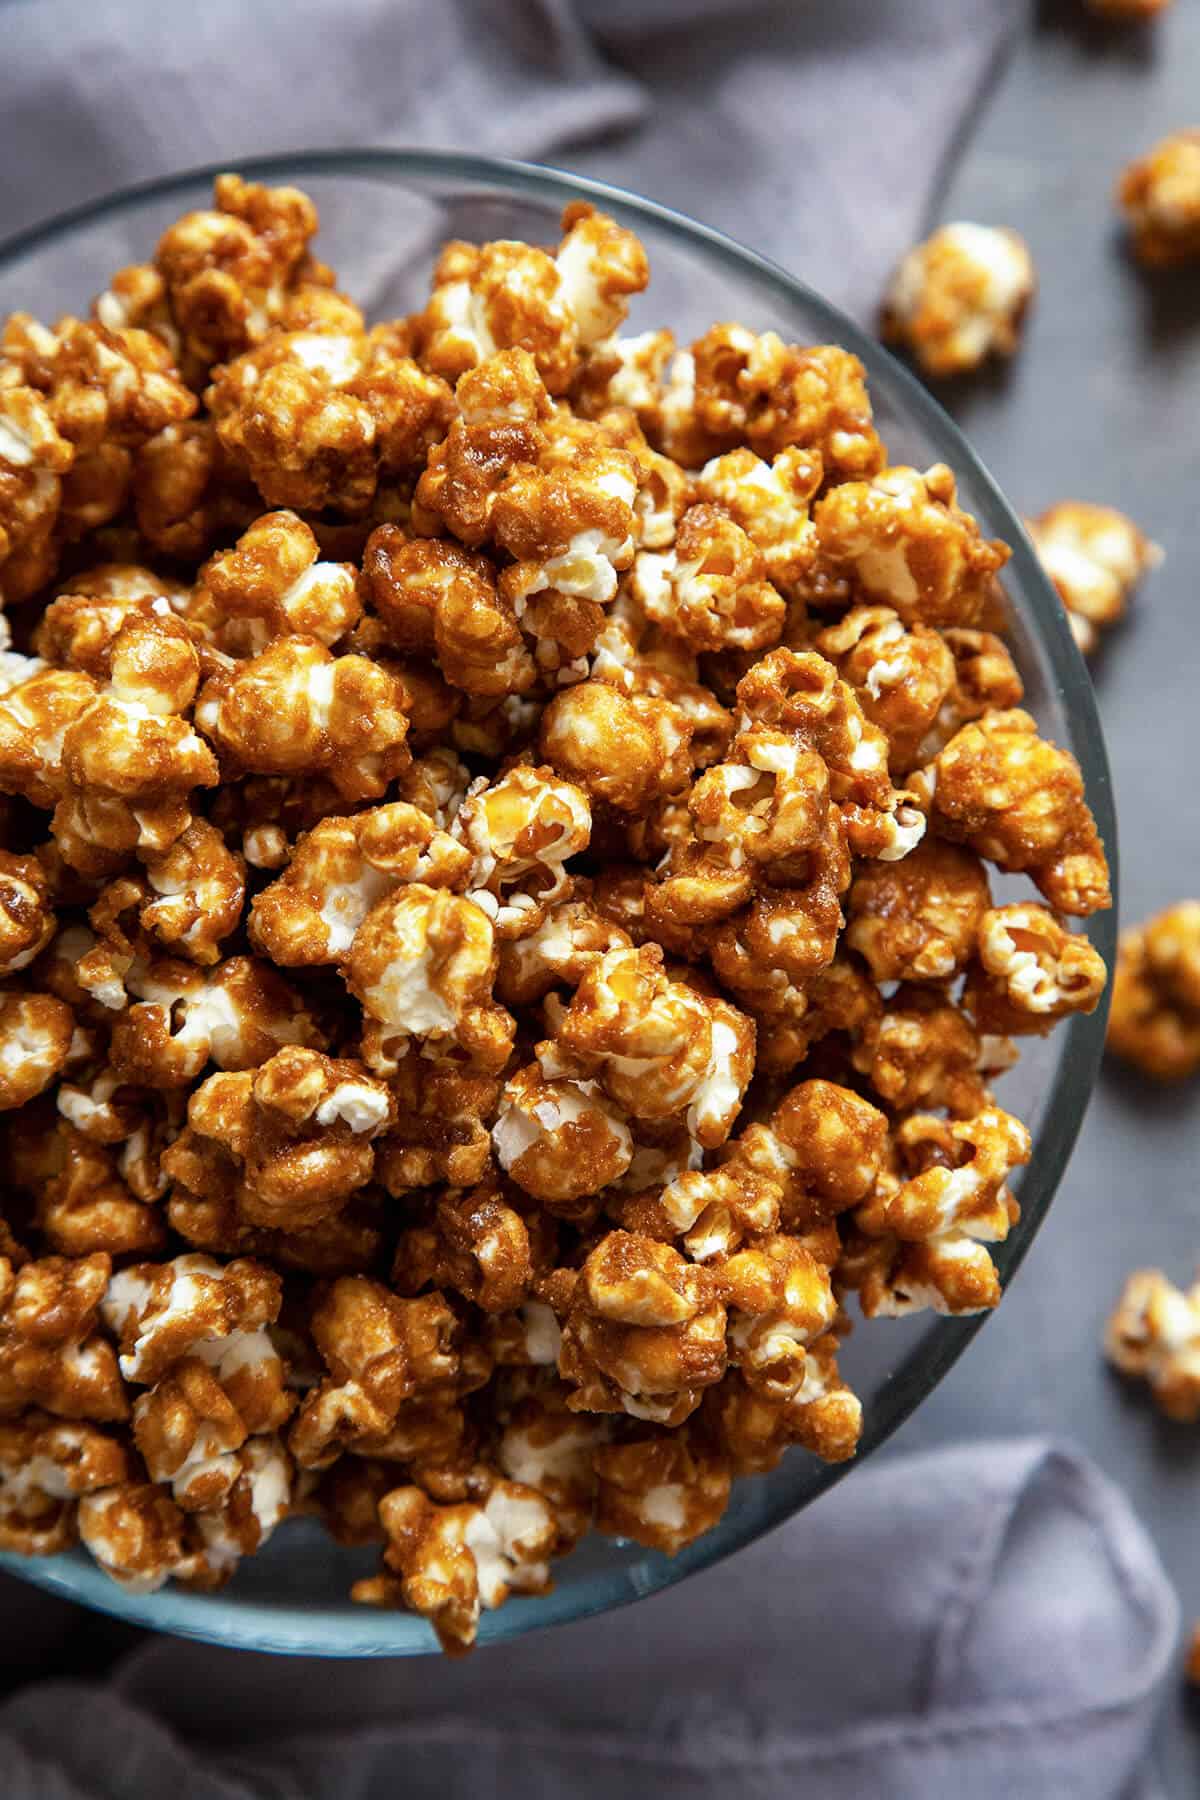 How to Make Perfect Caramel Popcorn at Home